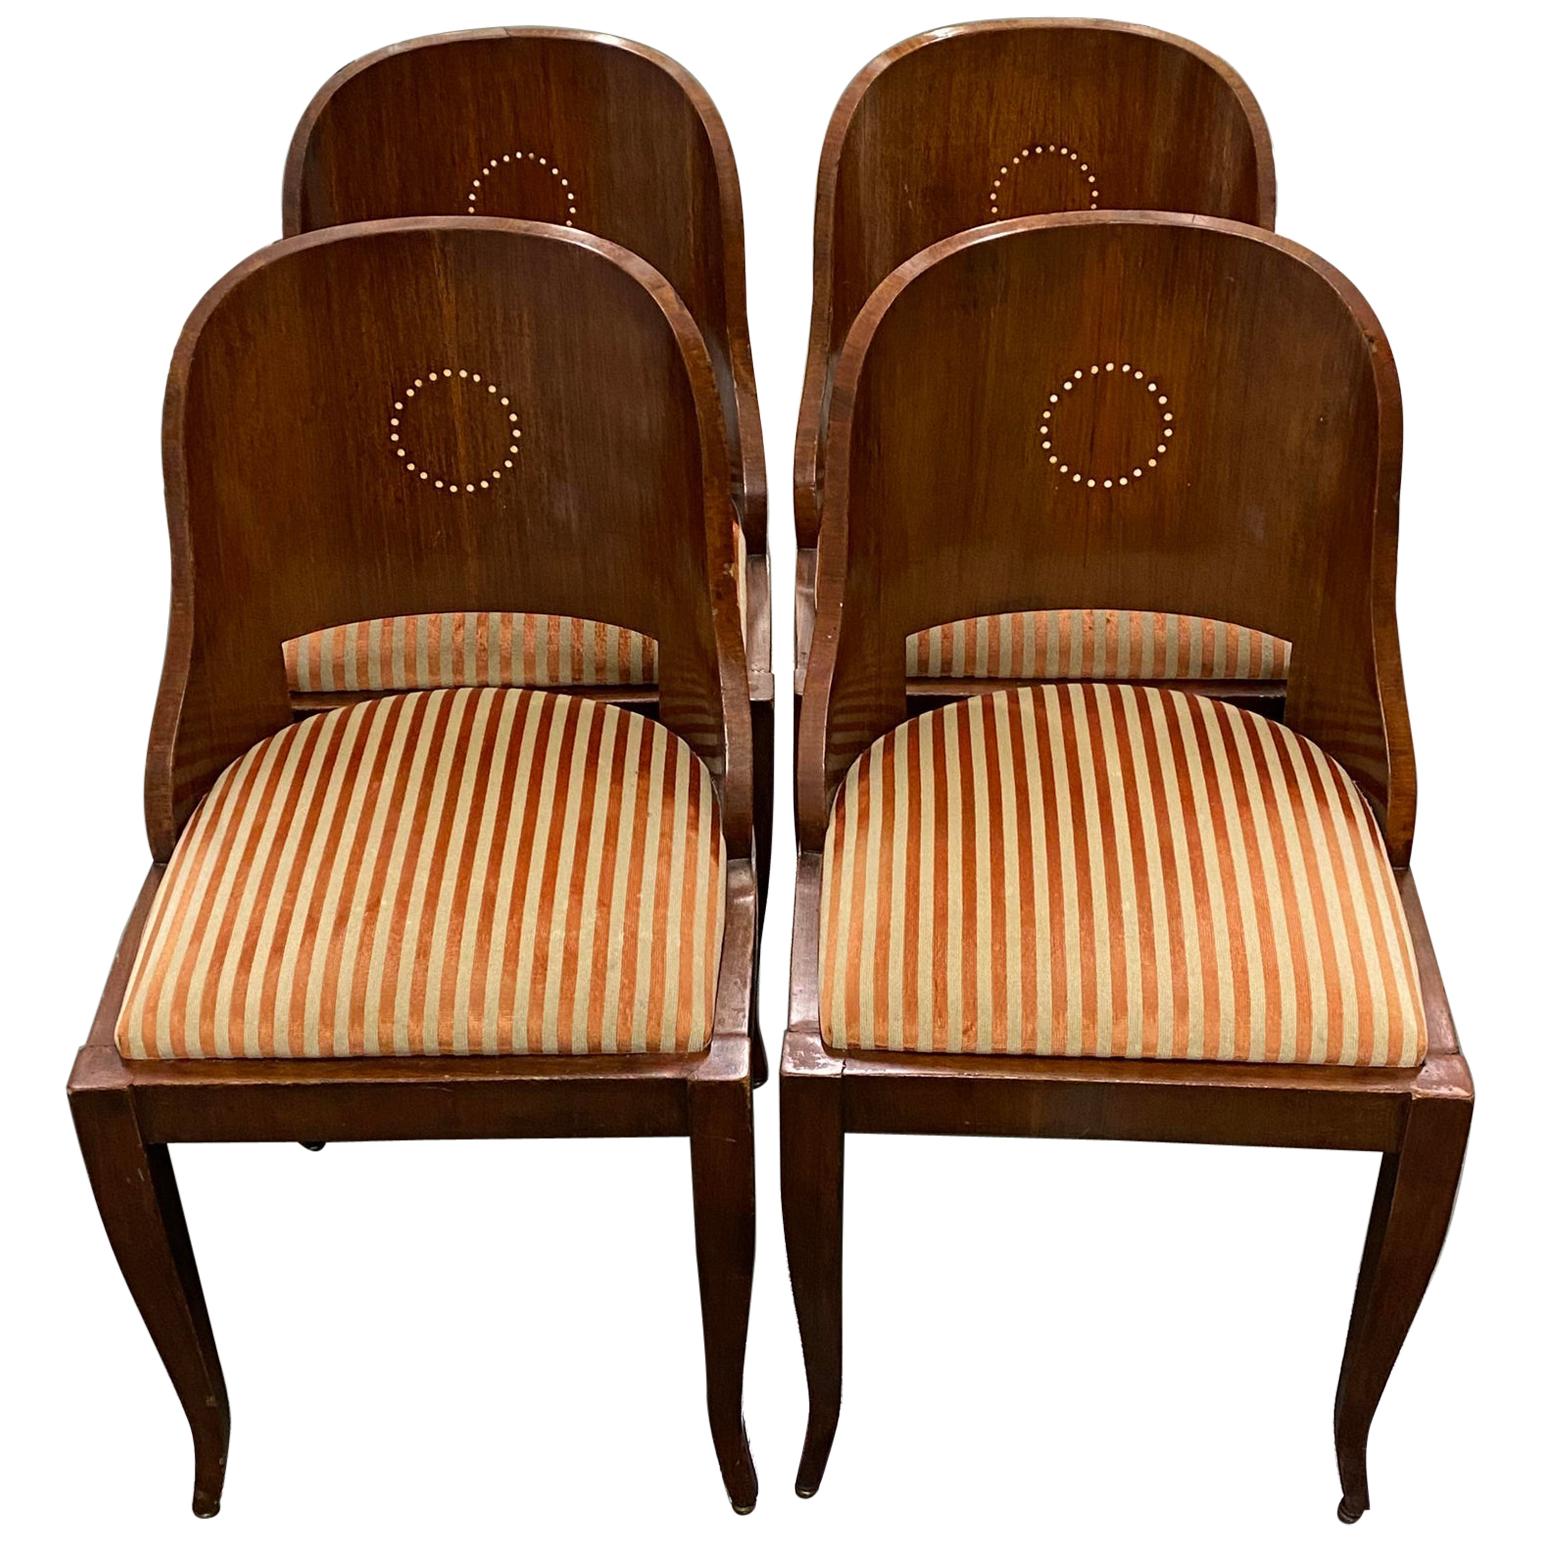 Set of Four American Empire "Gondola" Style Dining Chairs with Inlay